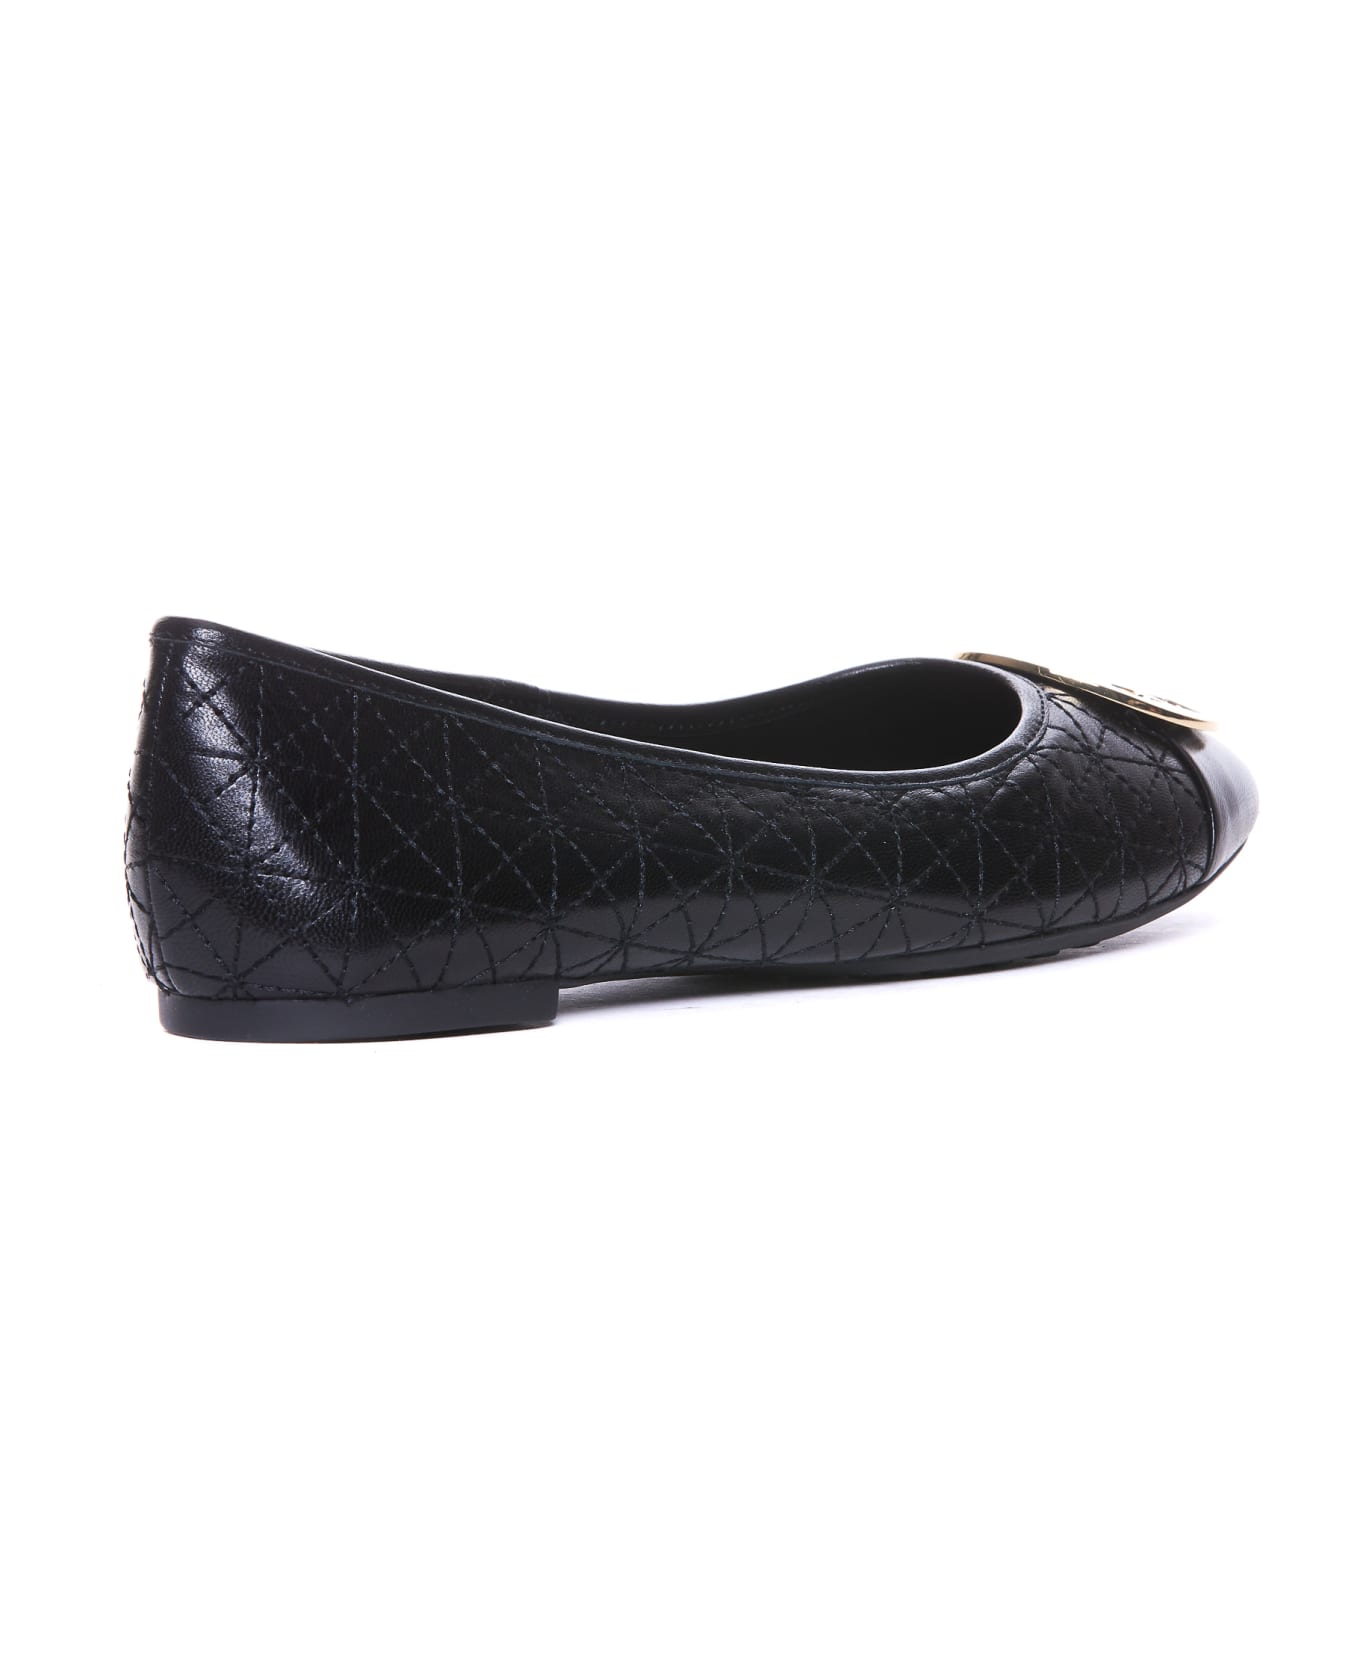 Tory Burch Claire Quilted Ballets - Black